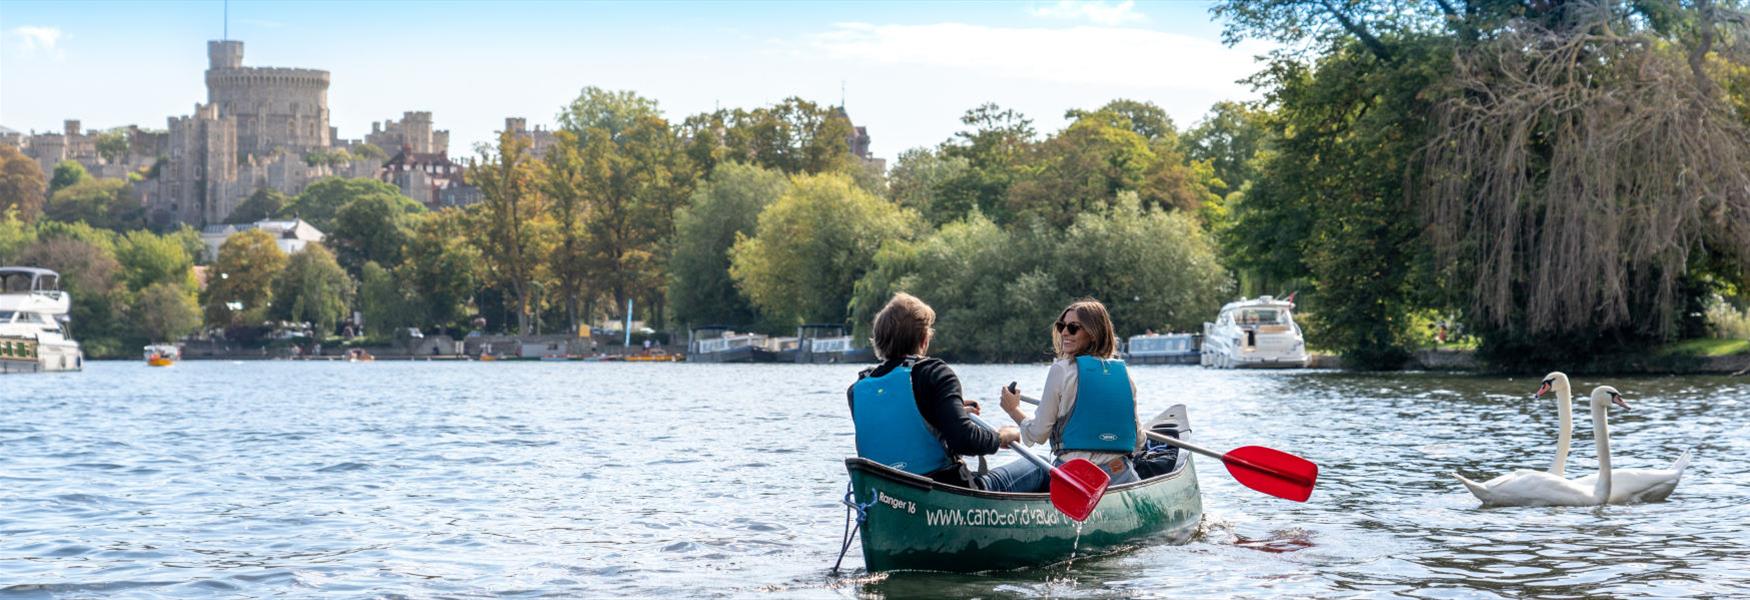 Couple canoeing on the River Thames